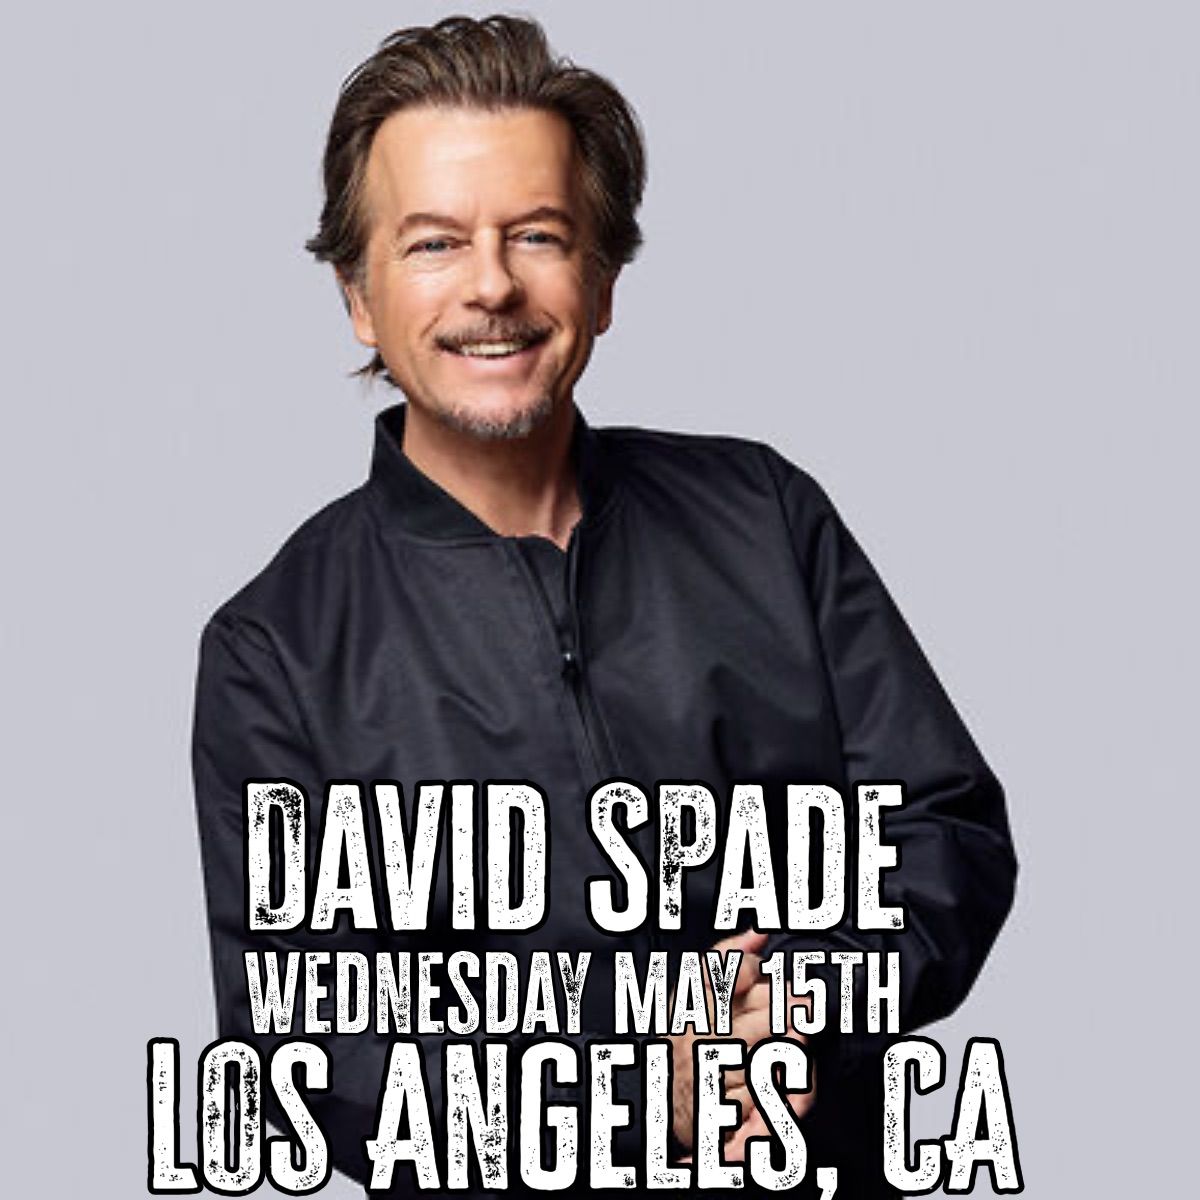 David Spade Live in LA This Wednesday!